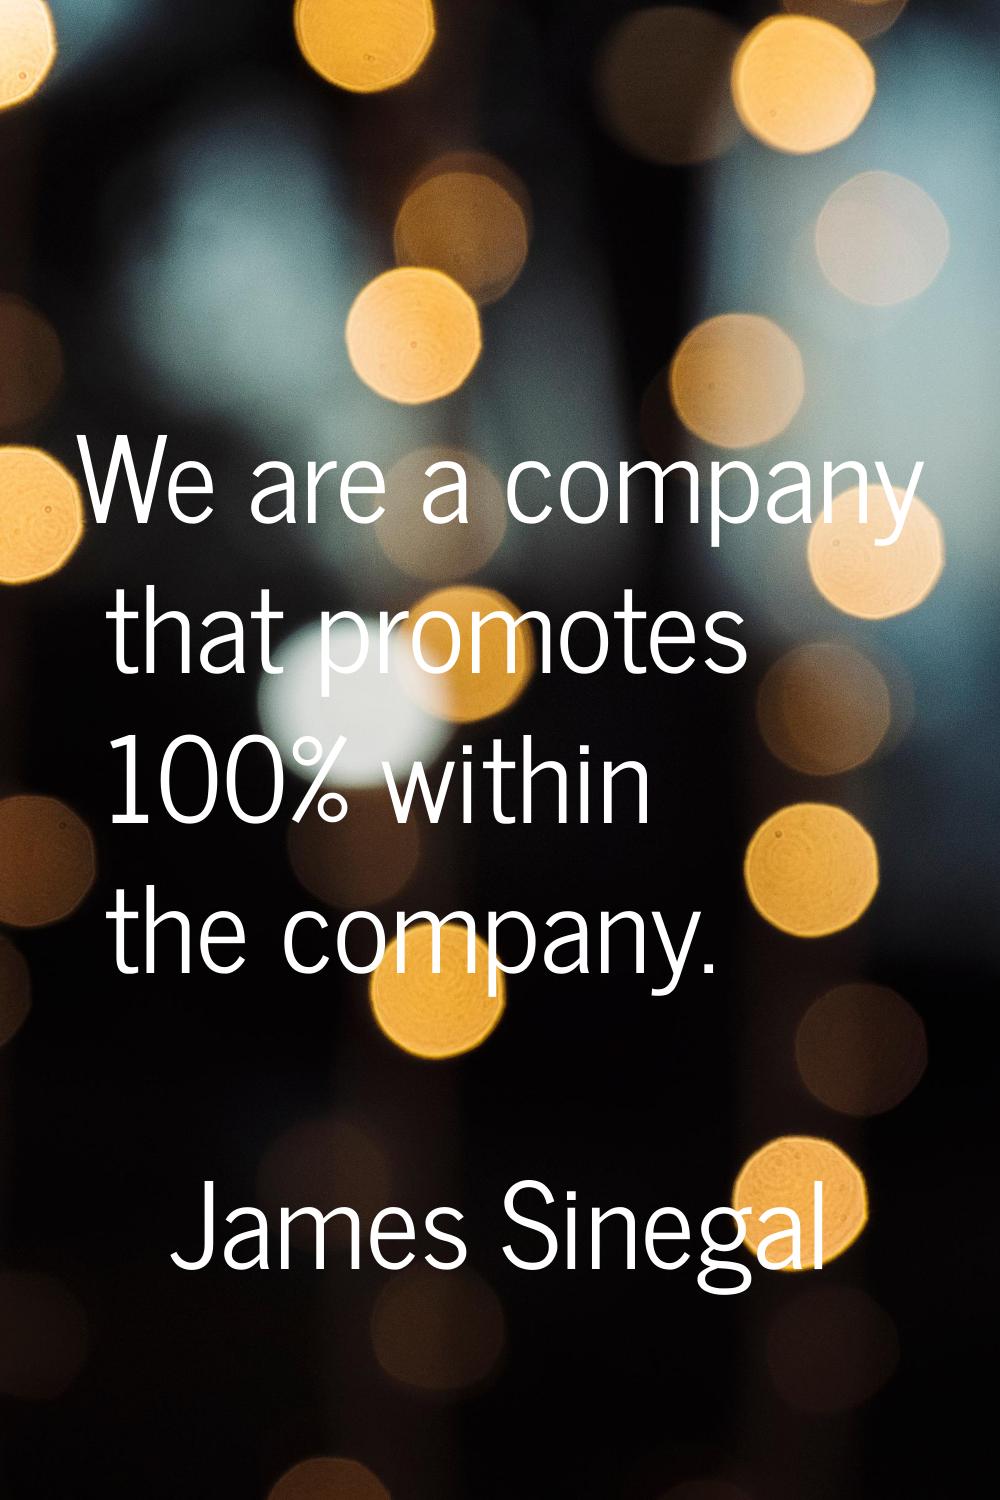 We are a company that promotes 100% within the company.